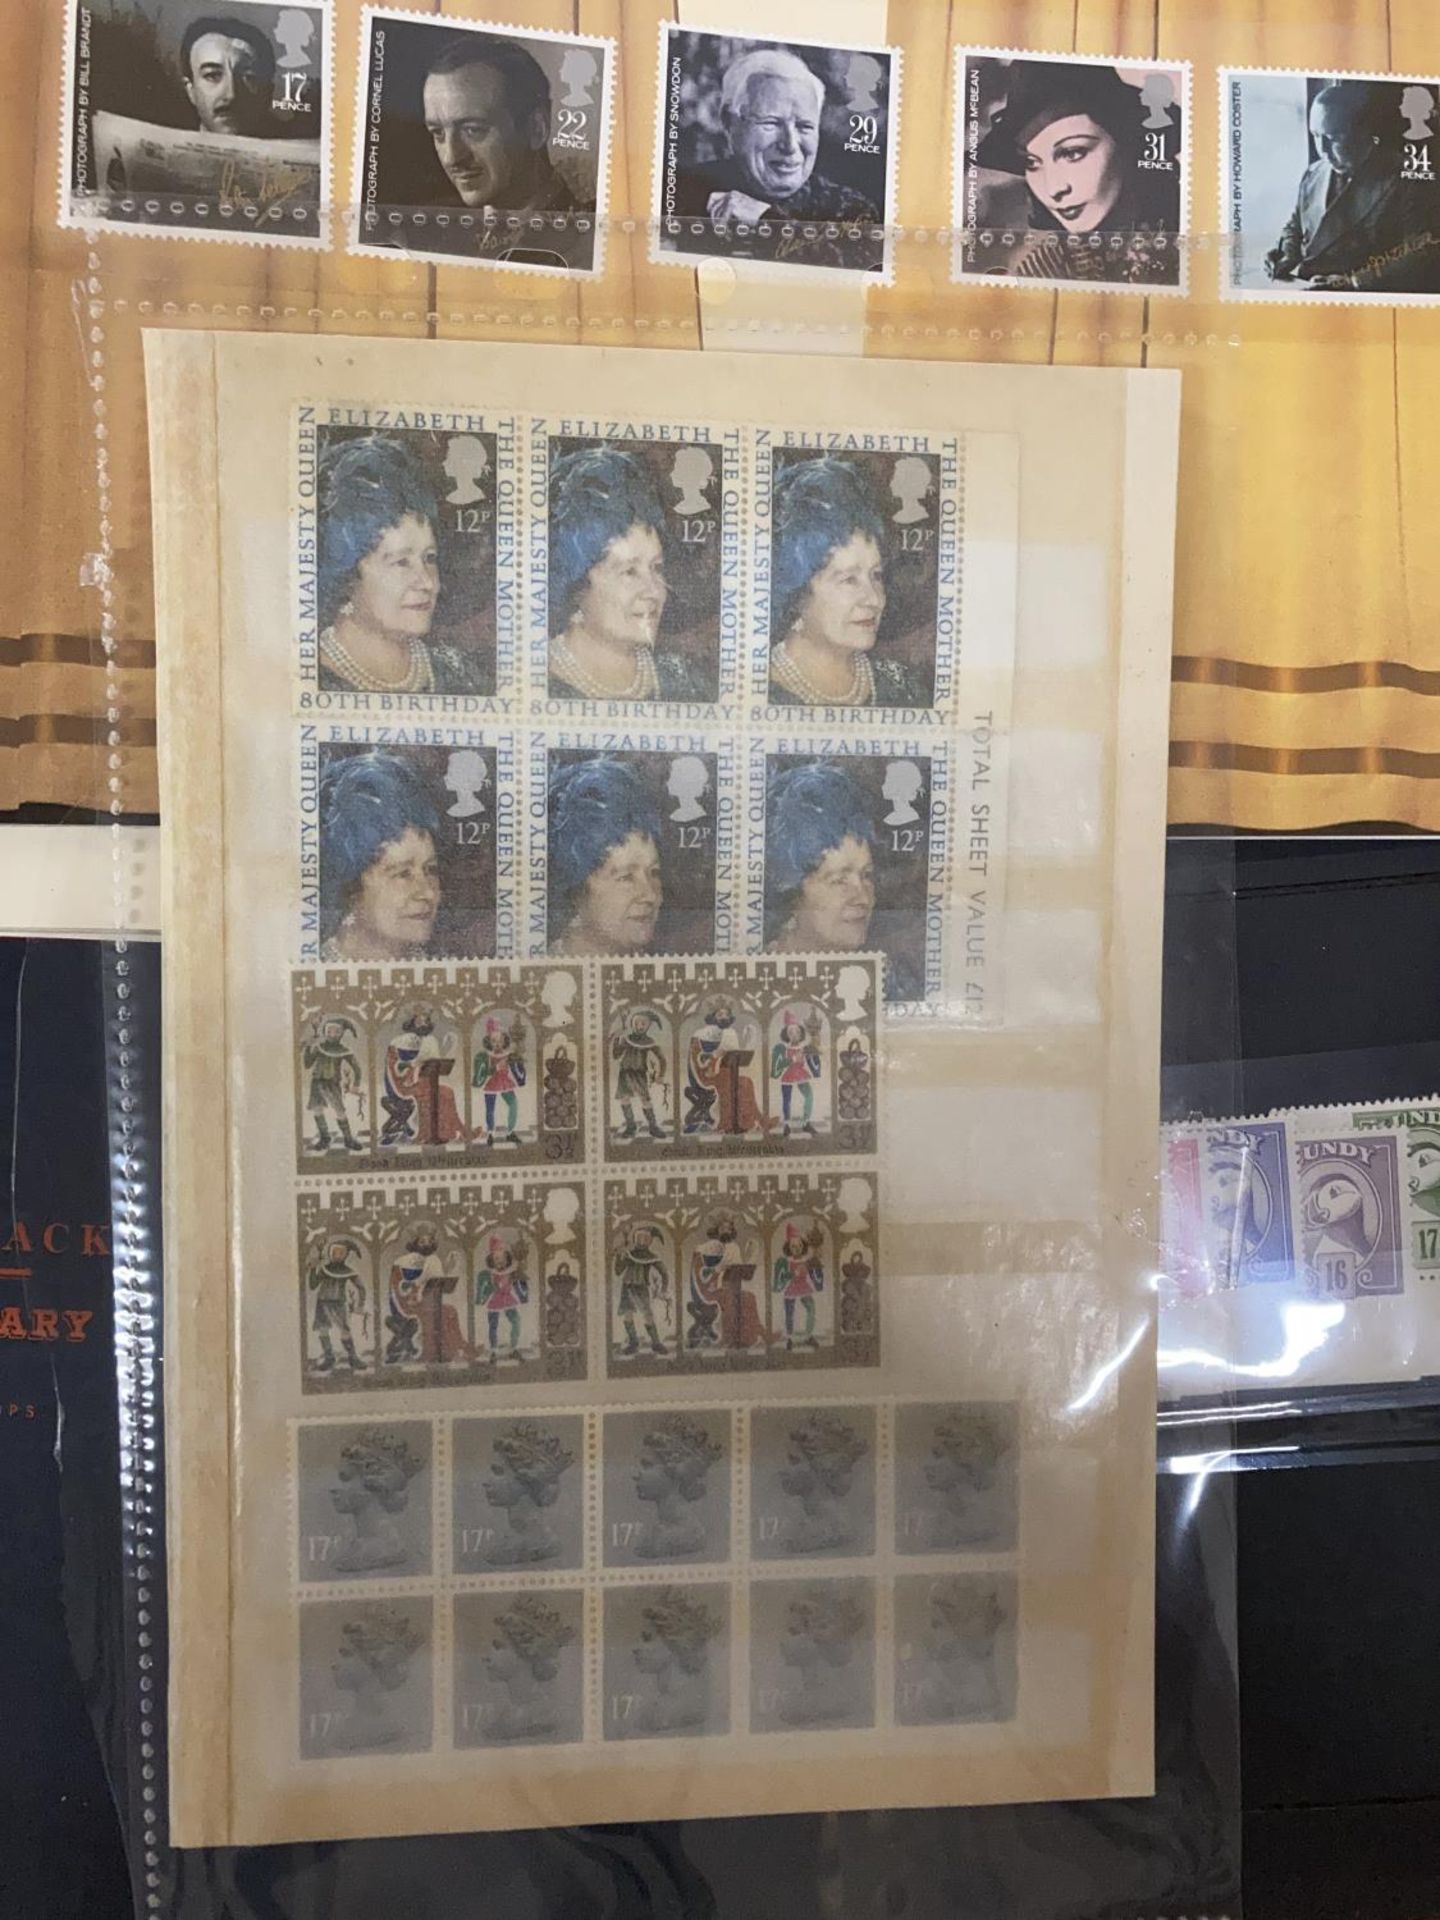 A GREAT BRITAIN STAMP ESTATE COLLECTION, THREE OLD ALBUMS TO INCLUDE STANLEY GIBBONS ALBUM WITH FINE - Image 2 of 11